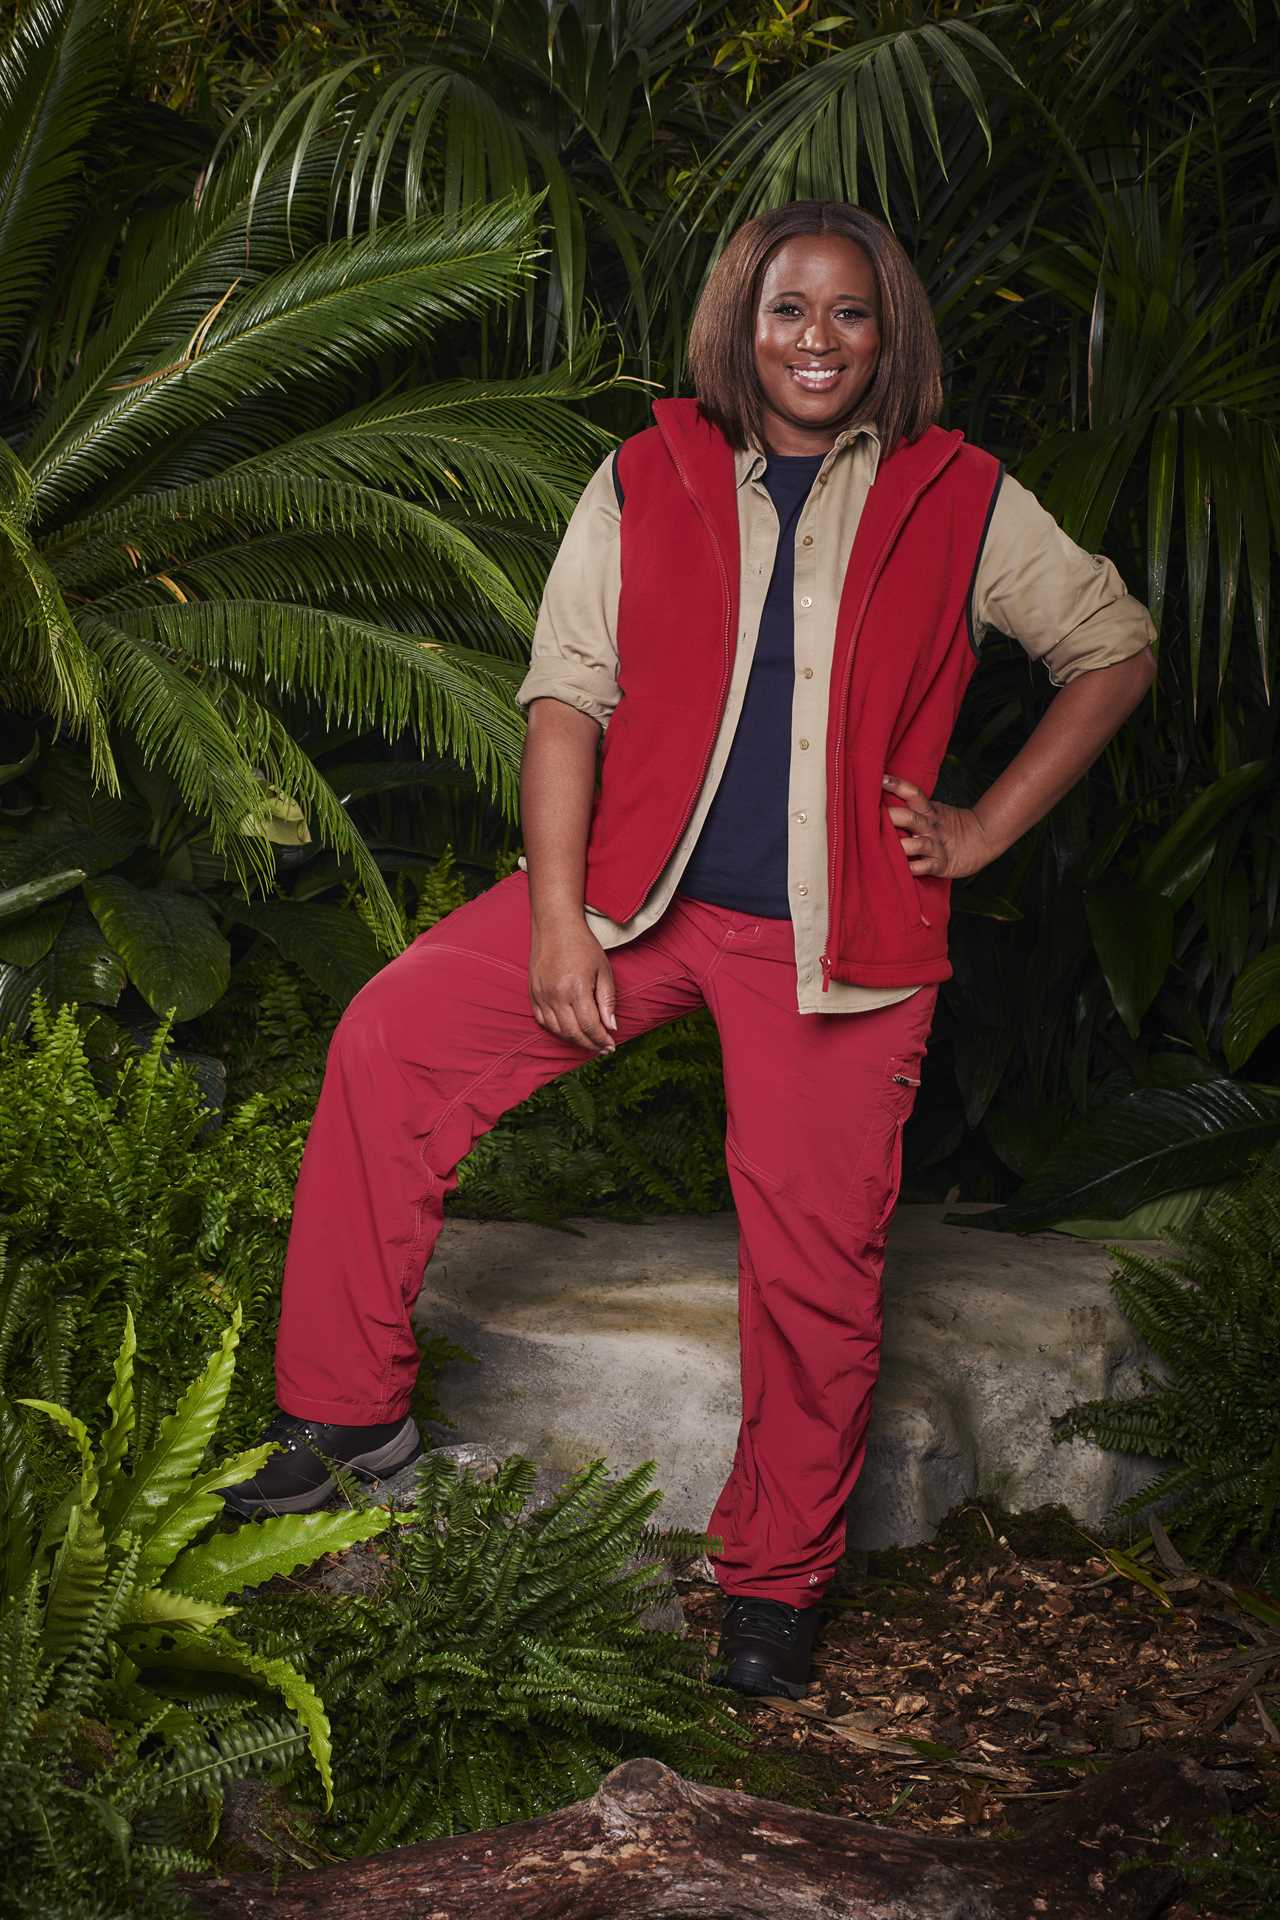 I’ll break down in tears on I’m A Celeb – my partner doesn’t think I’ll cope on the show, says Charlene White